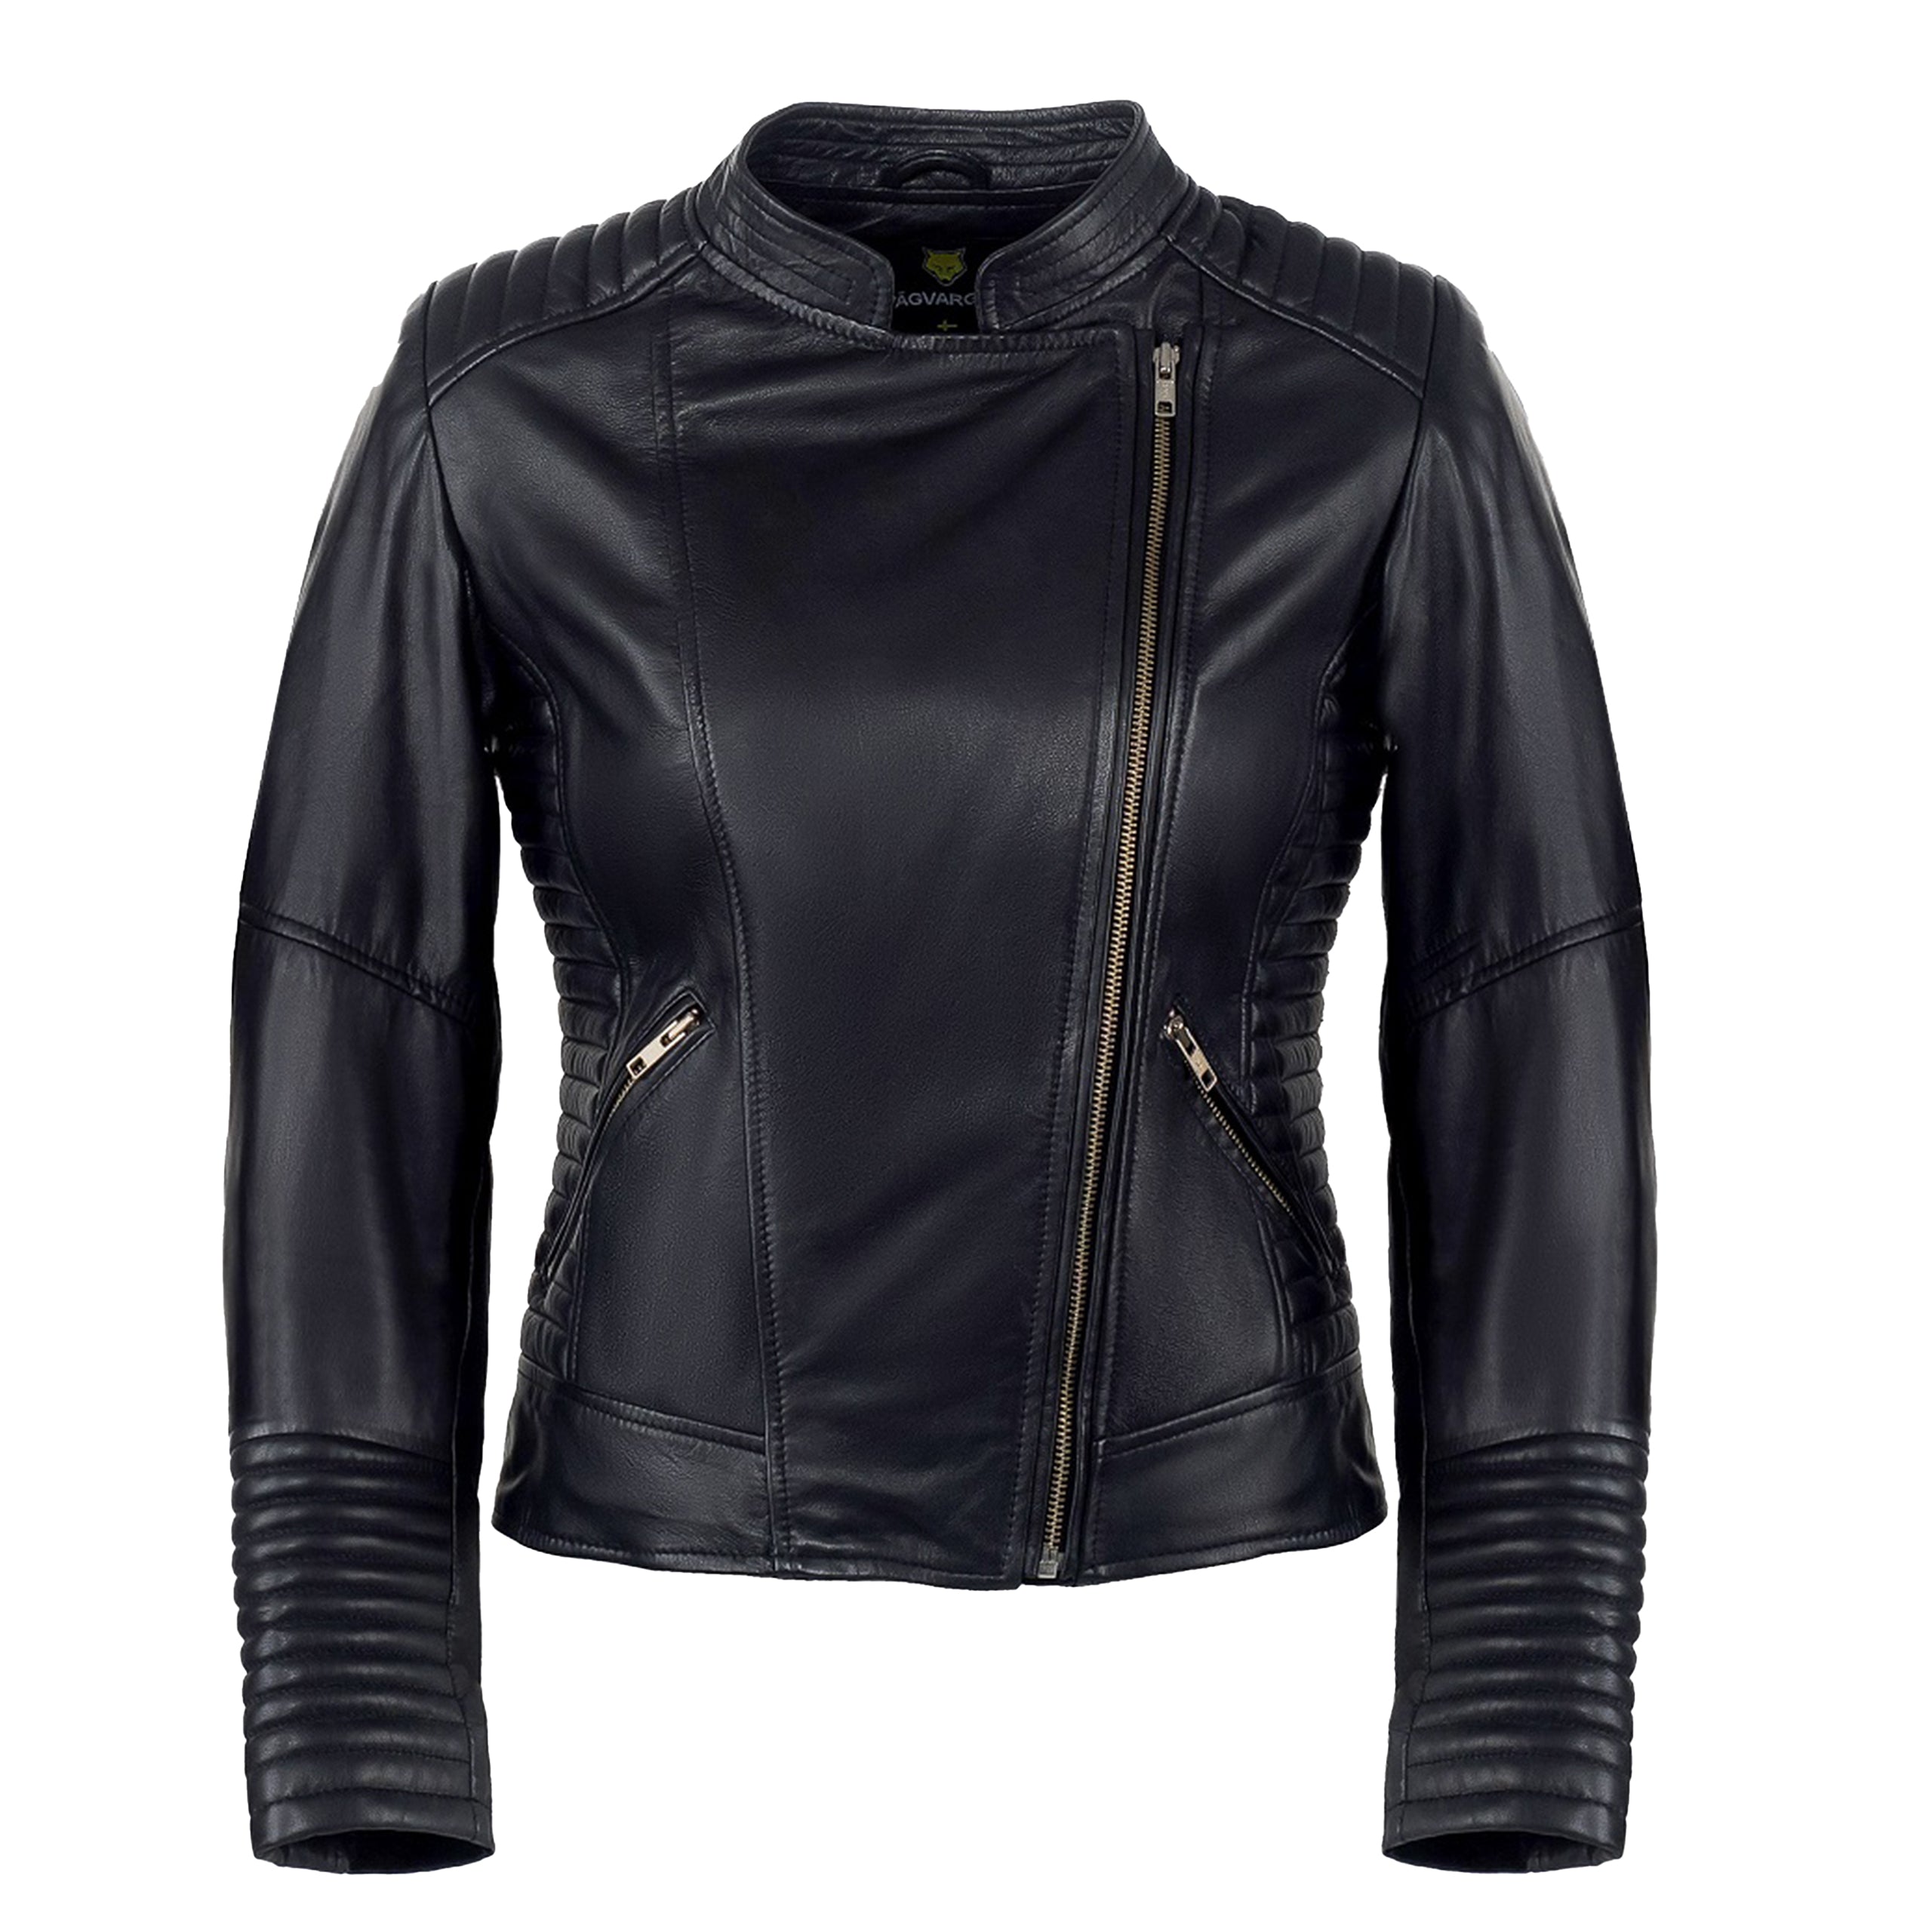 AMY'S ARMORED WOMEN'S MOTORCYCLE LEATHER – Corelli